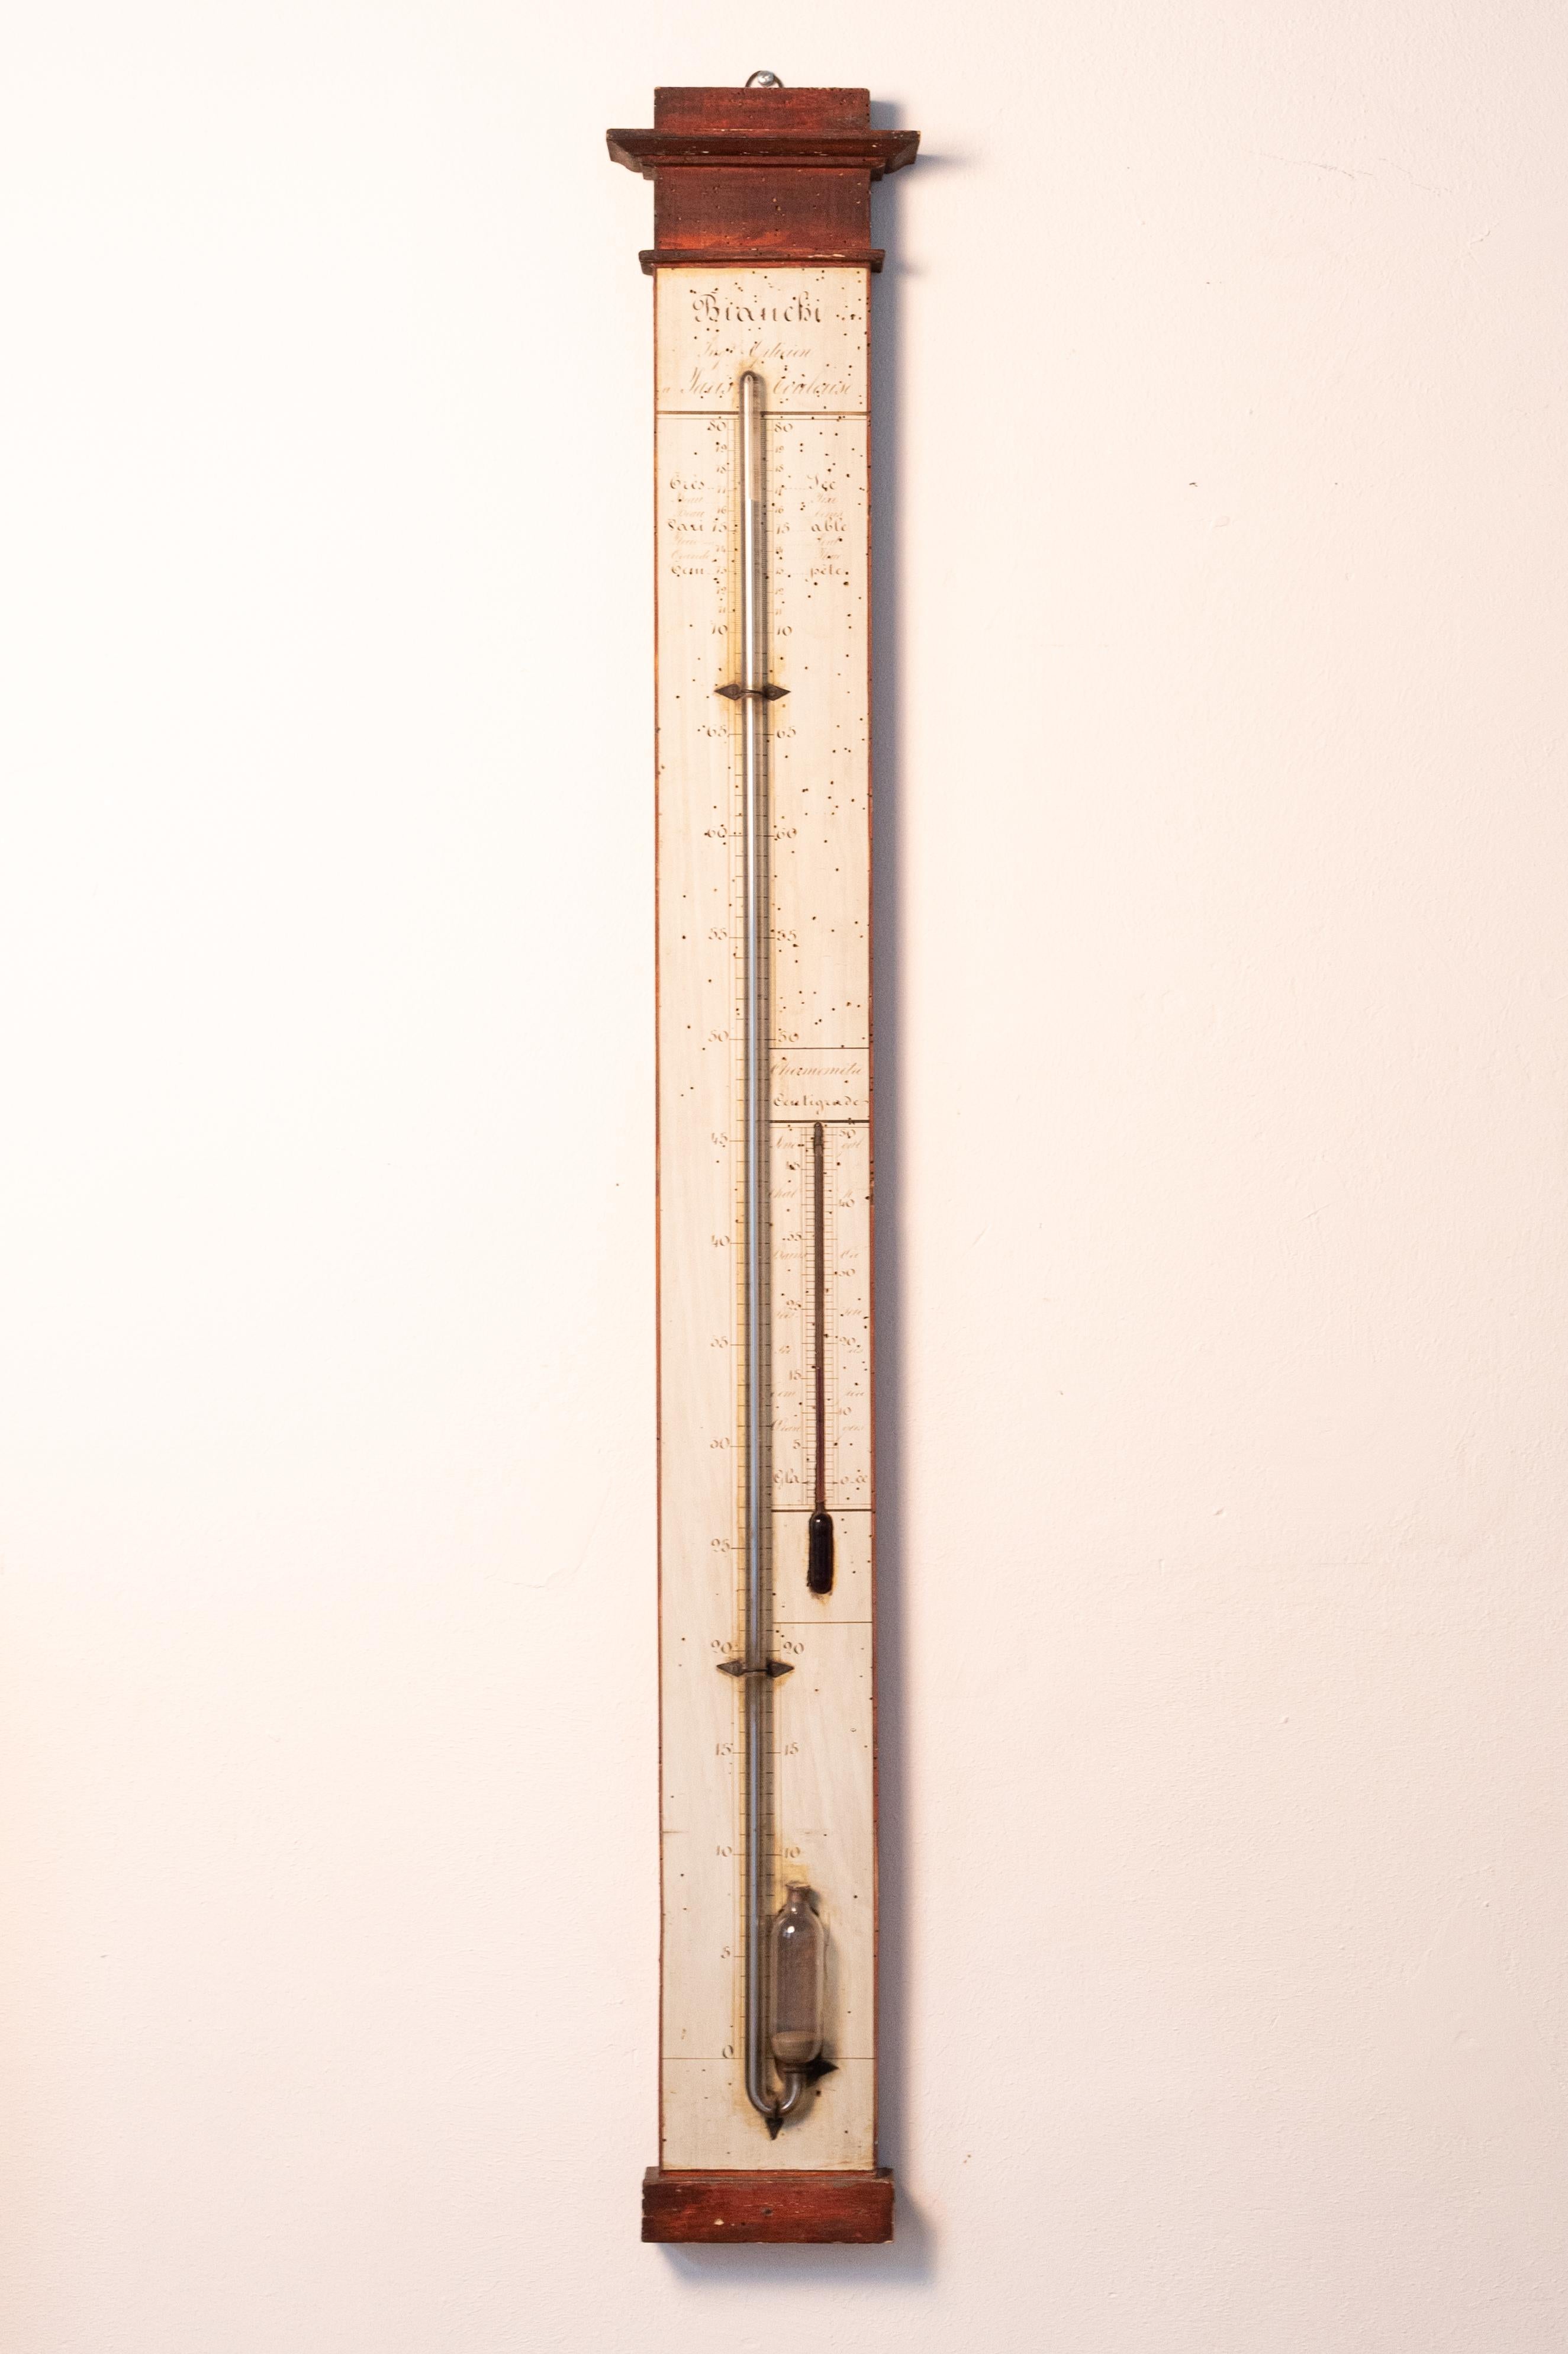 This hand-painted mercury thermometer/barometer dates from the first half of the 19th century. It was made by Bianchi, as can be read at the top of the thermometer. Very rare! 

Barthélémy-Urbain BIANCHI (1821-1898), engineer-optician, distinguished